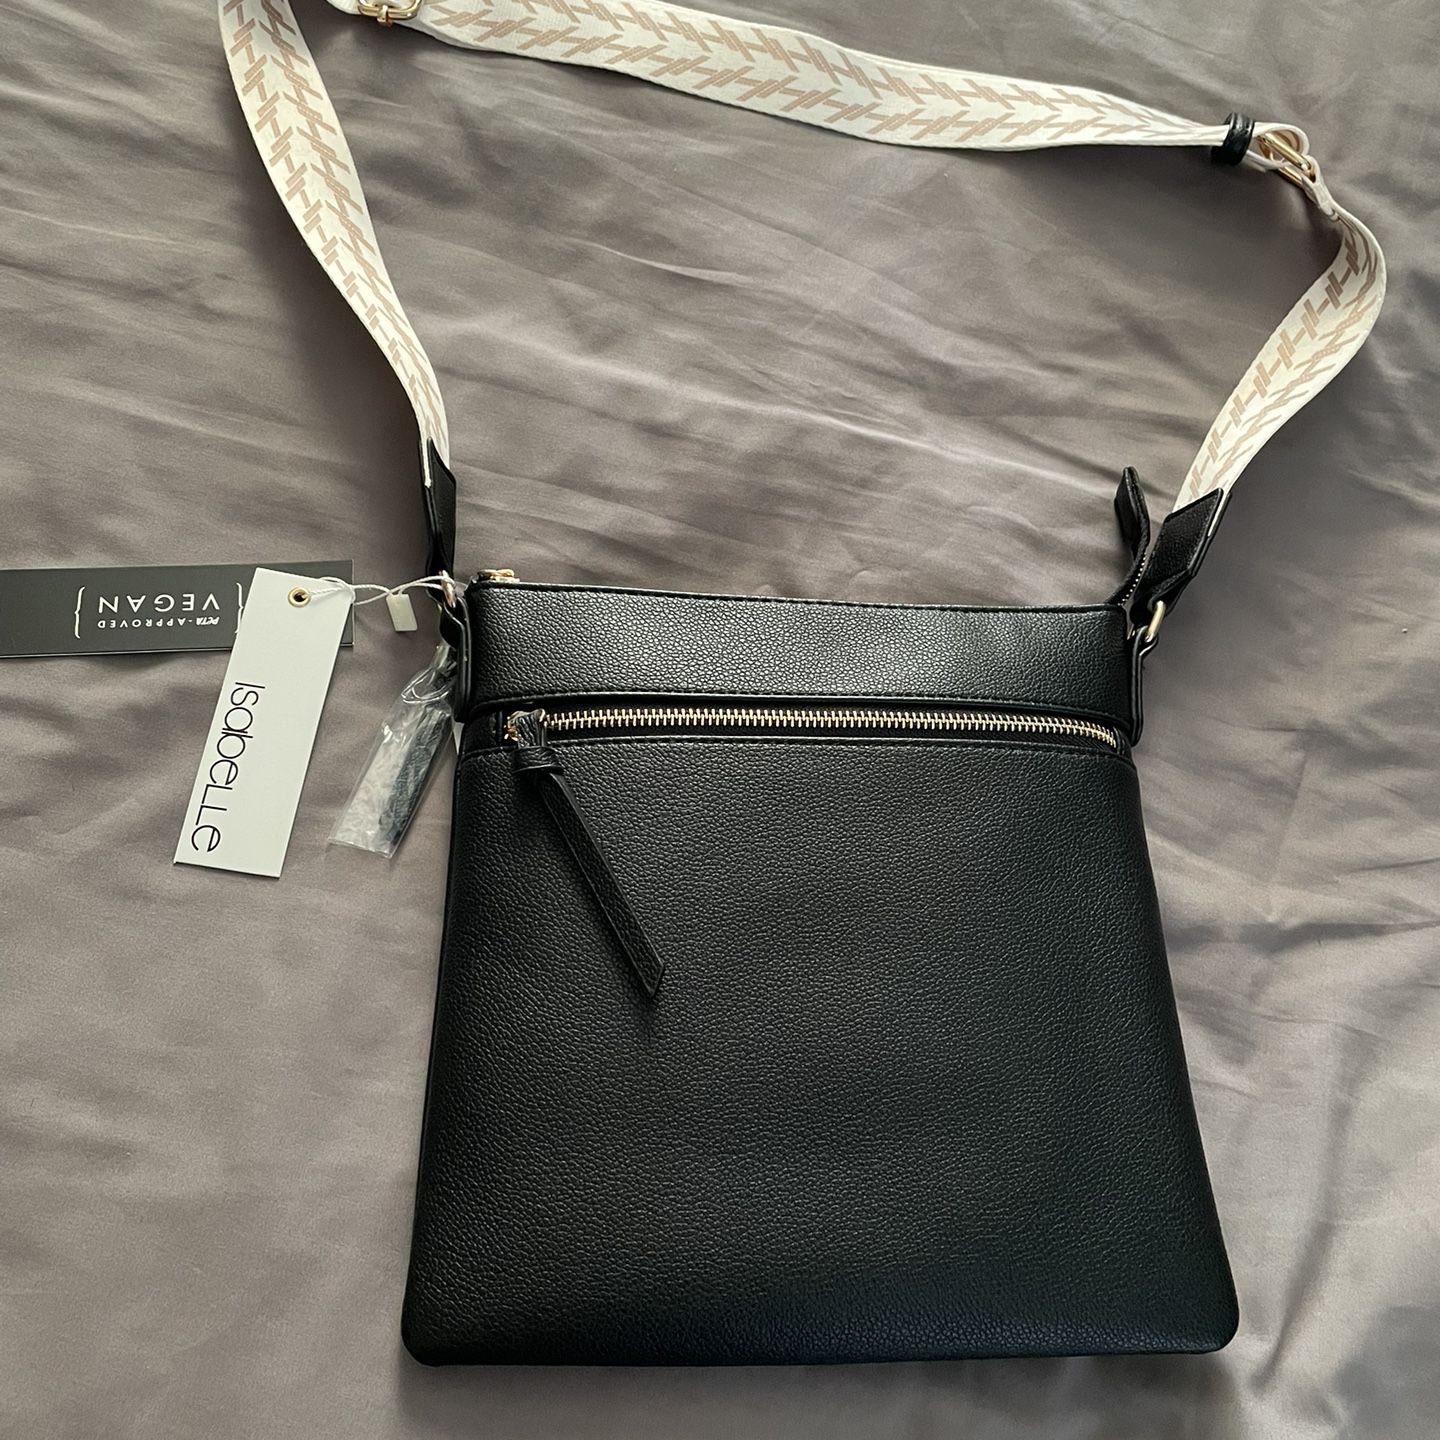 New Vegan Isabelle handbag with tag FIRM PRICE for Sale in La Mesa, CA -  OfferUp